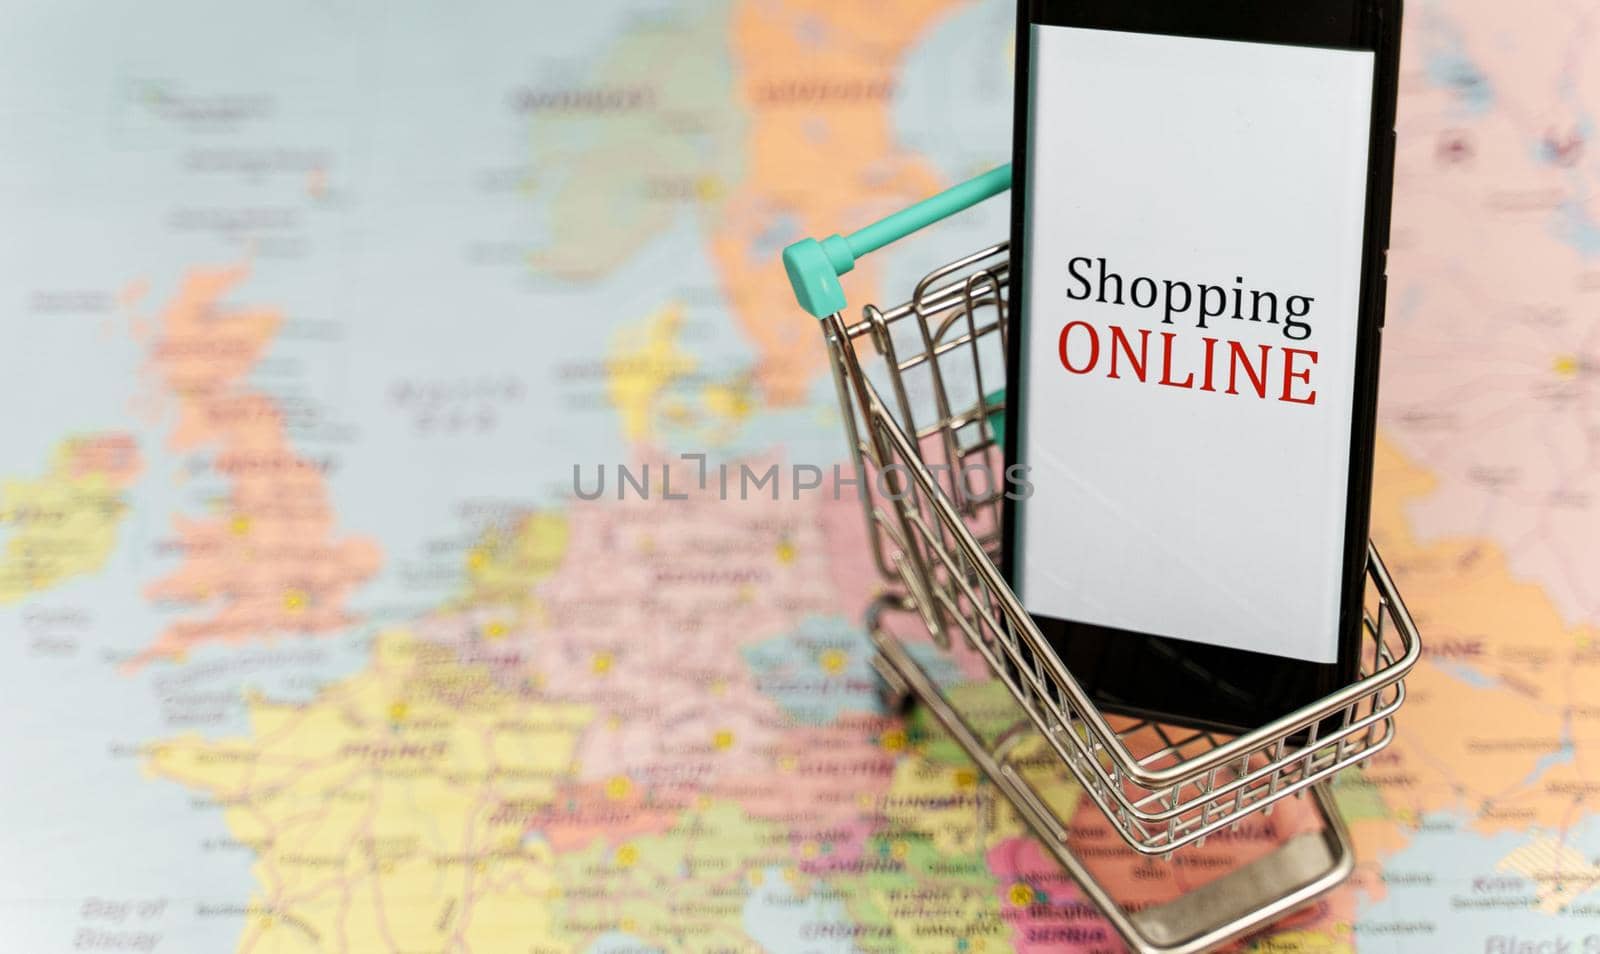 Mobile phone in shopping trolley. Online shopping concept.